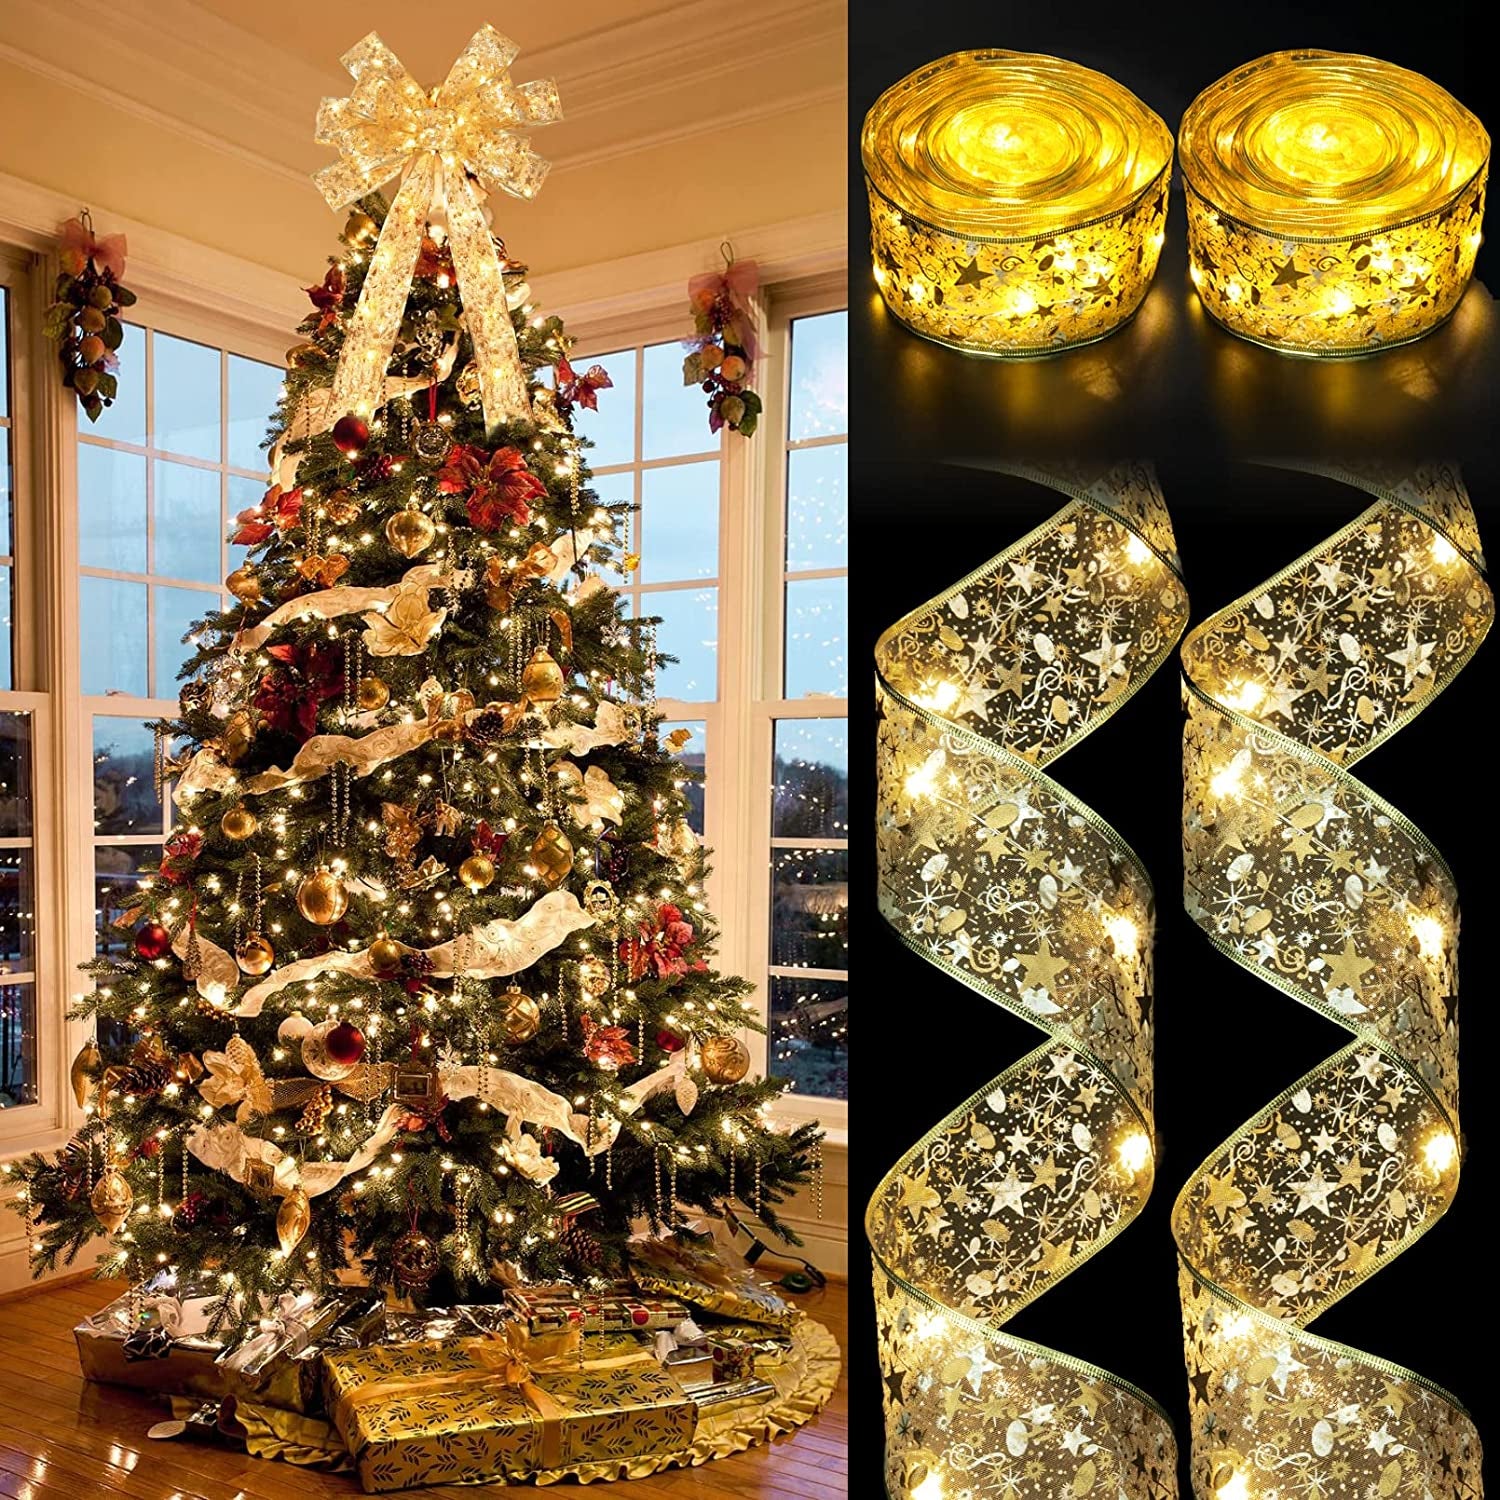 40Ft 120 LED Christmas Ribbon Lights, Gold Christmas Decorations Fairy Lights Wider Double Layer Ribbon Bows Battery Operated Copper Wire Strings Lights for New Year Party Christmas Tree Decor